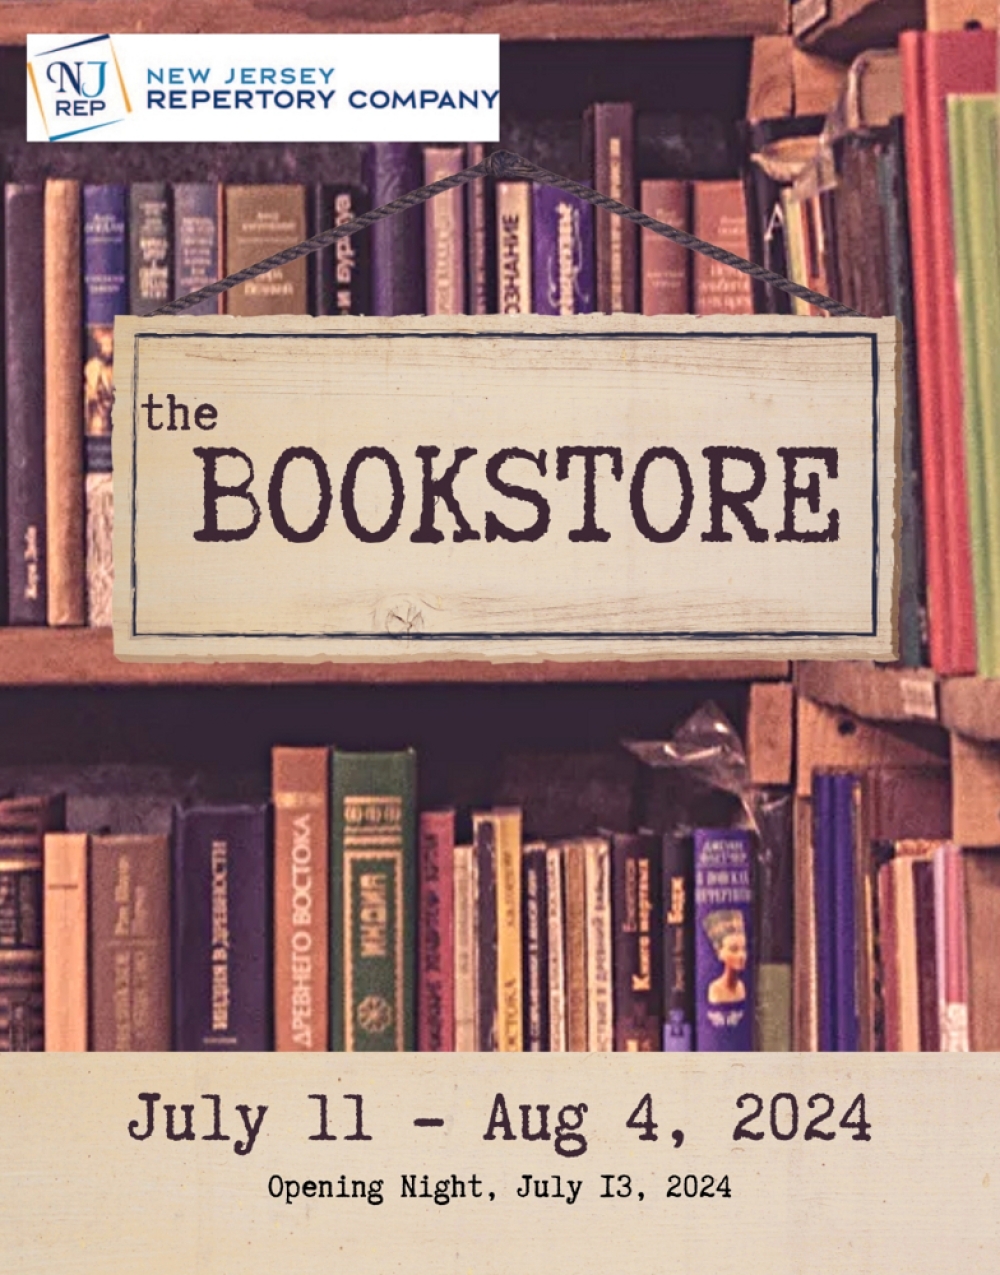 The Bookstore at New Jersey Repertory Company